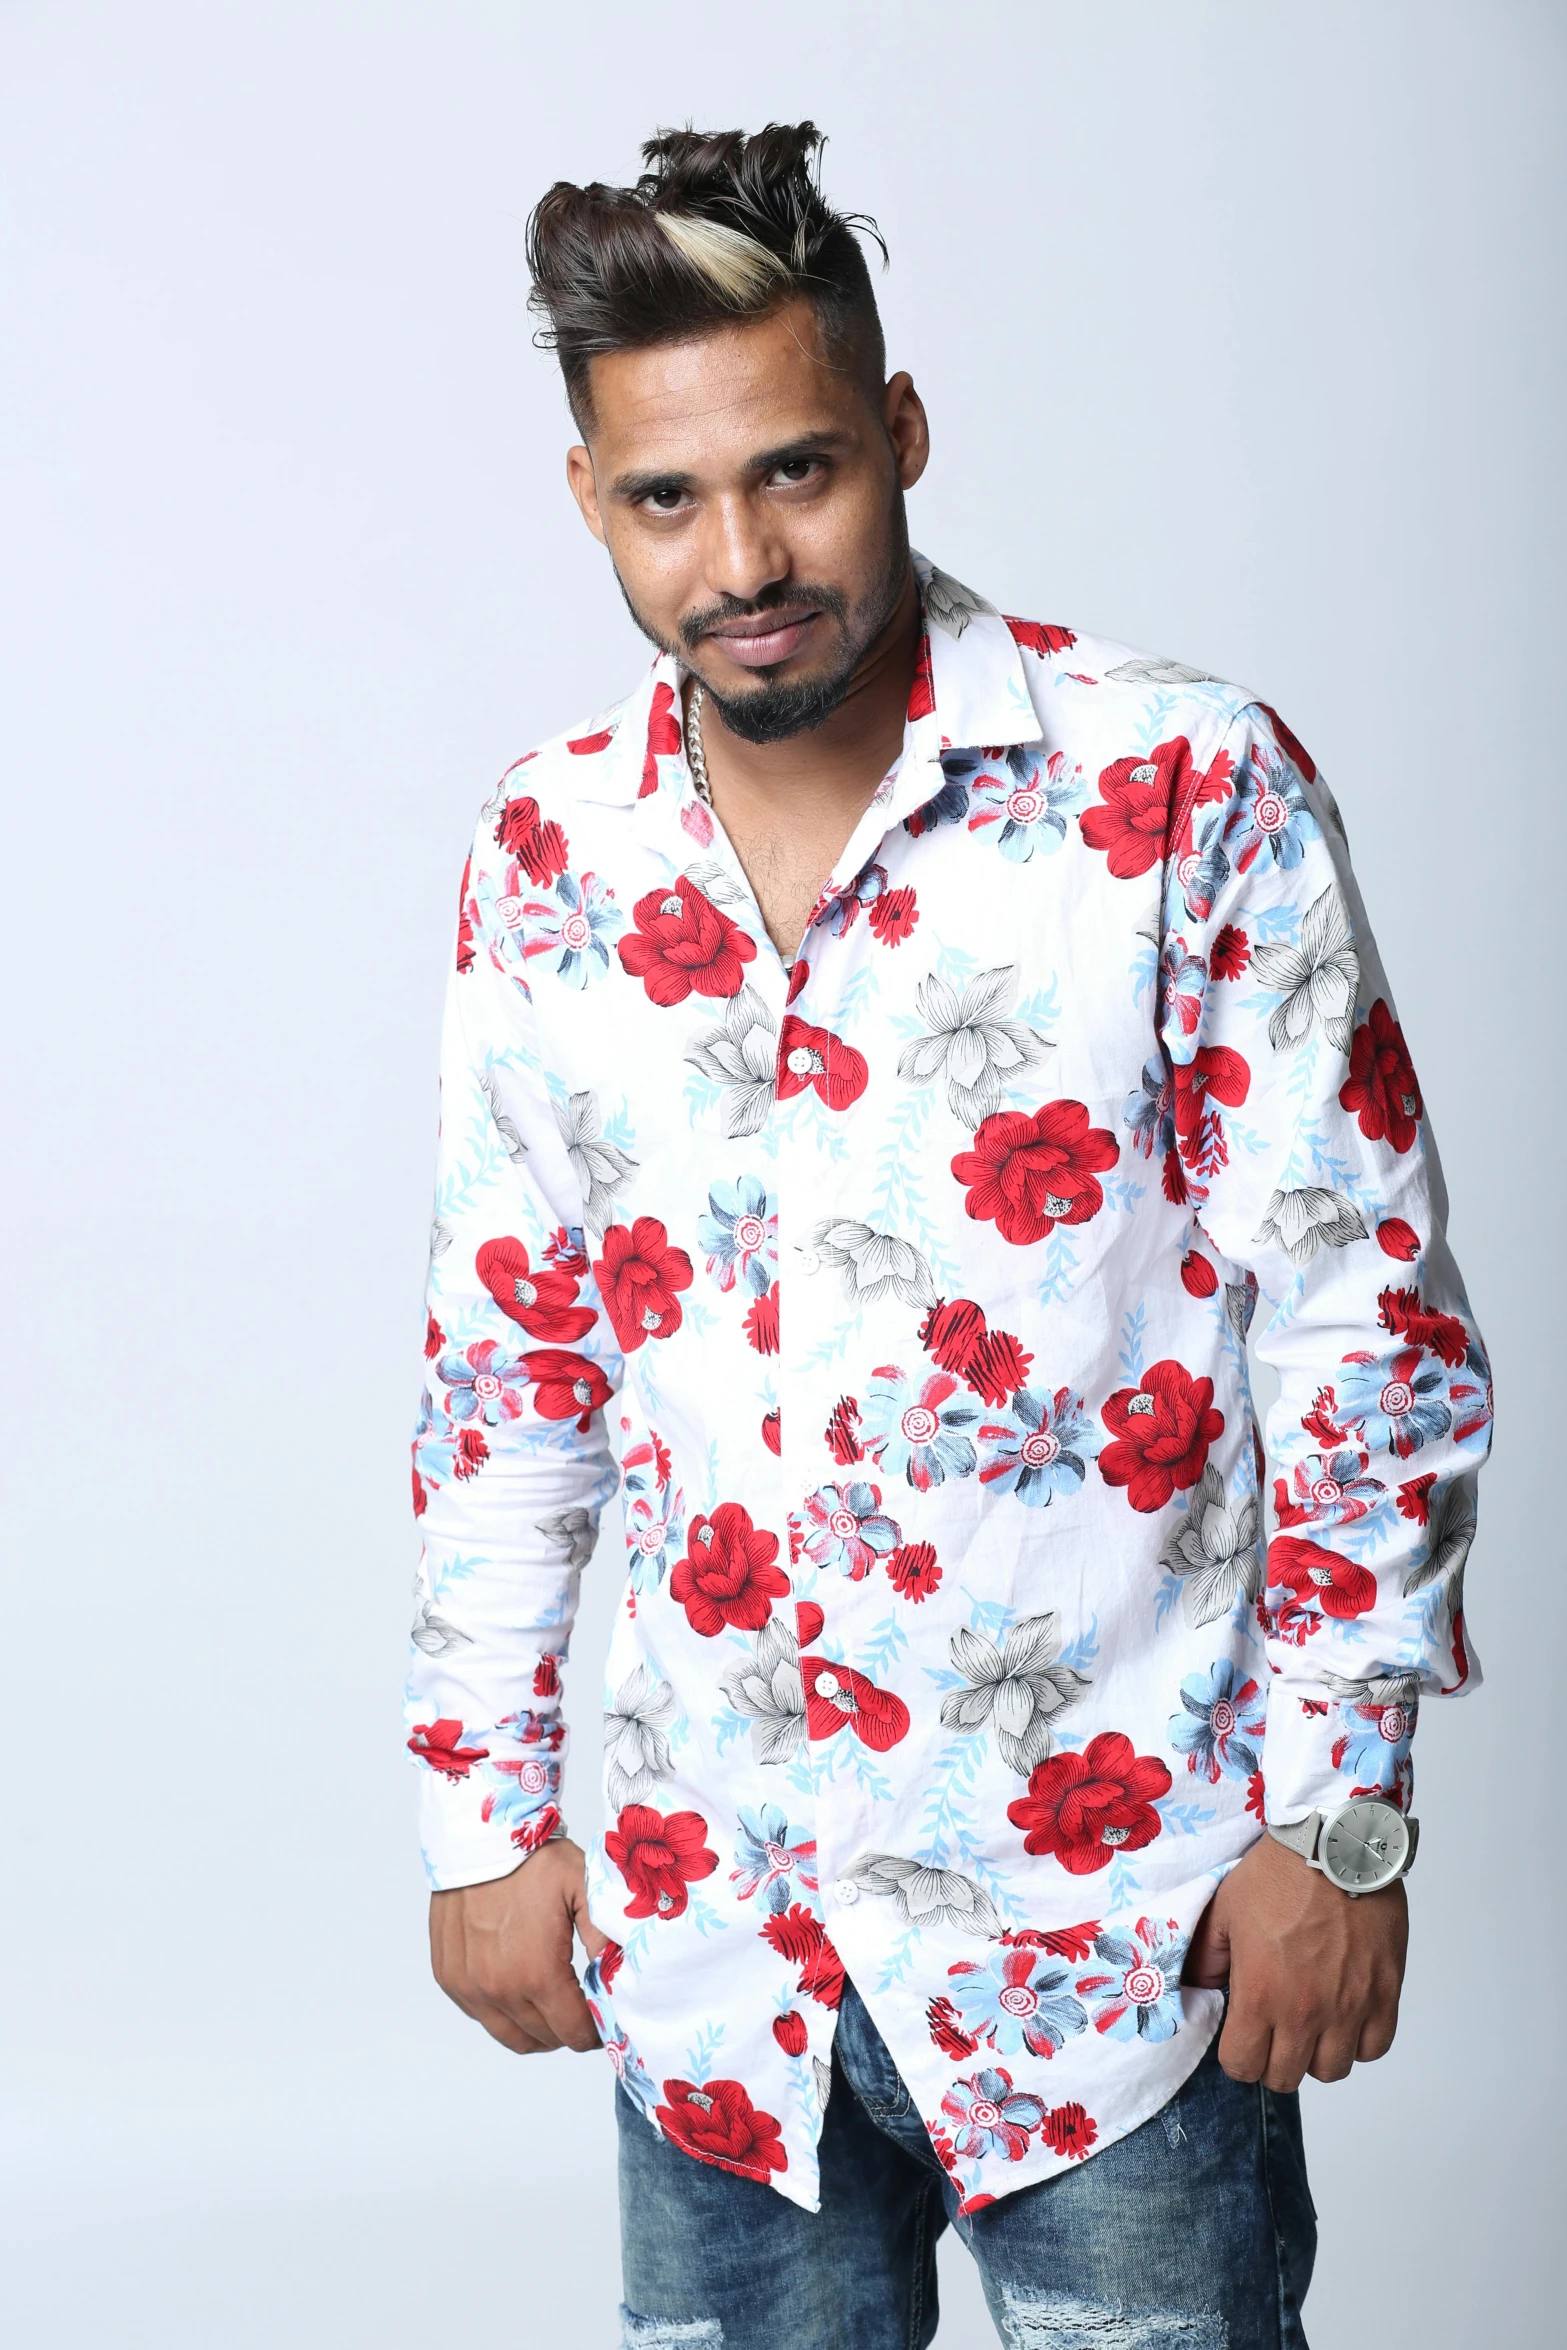 an image of a man wearing floral shirt